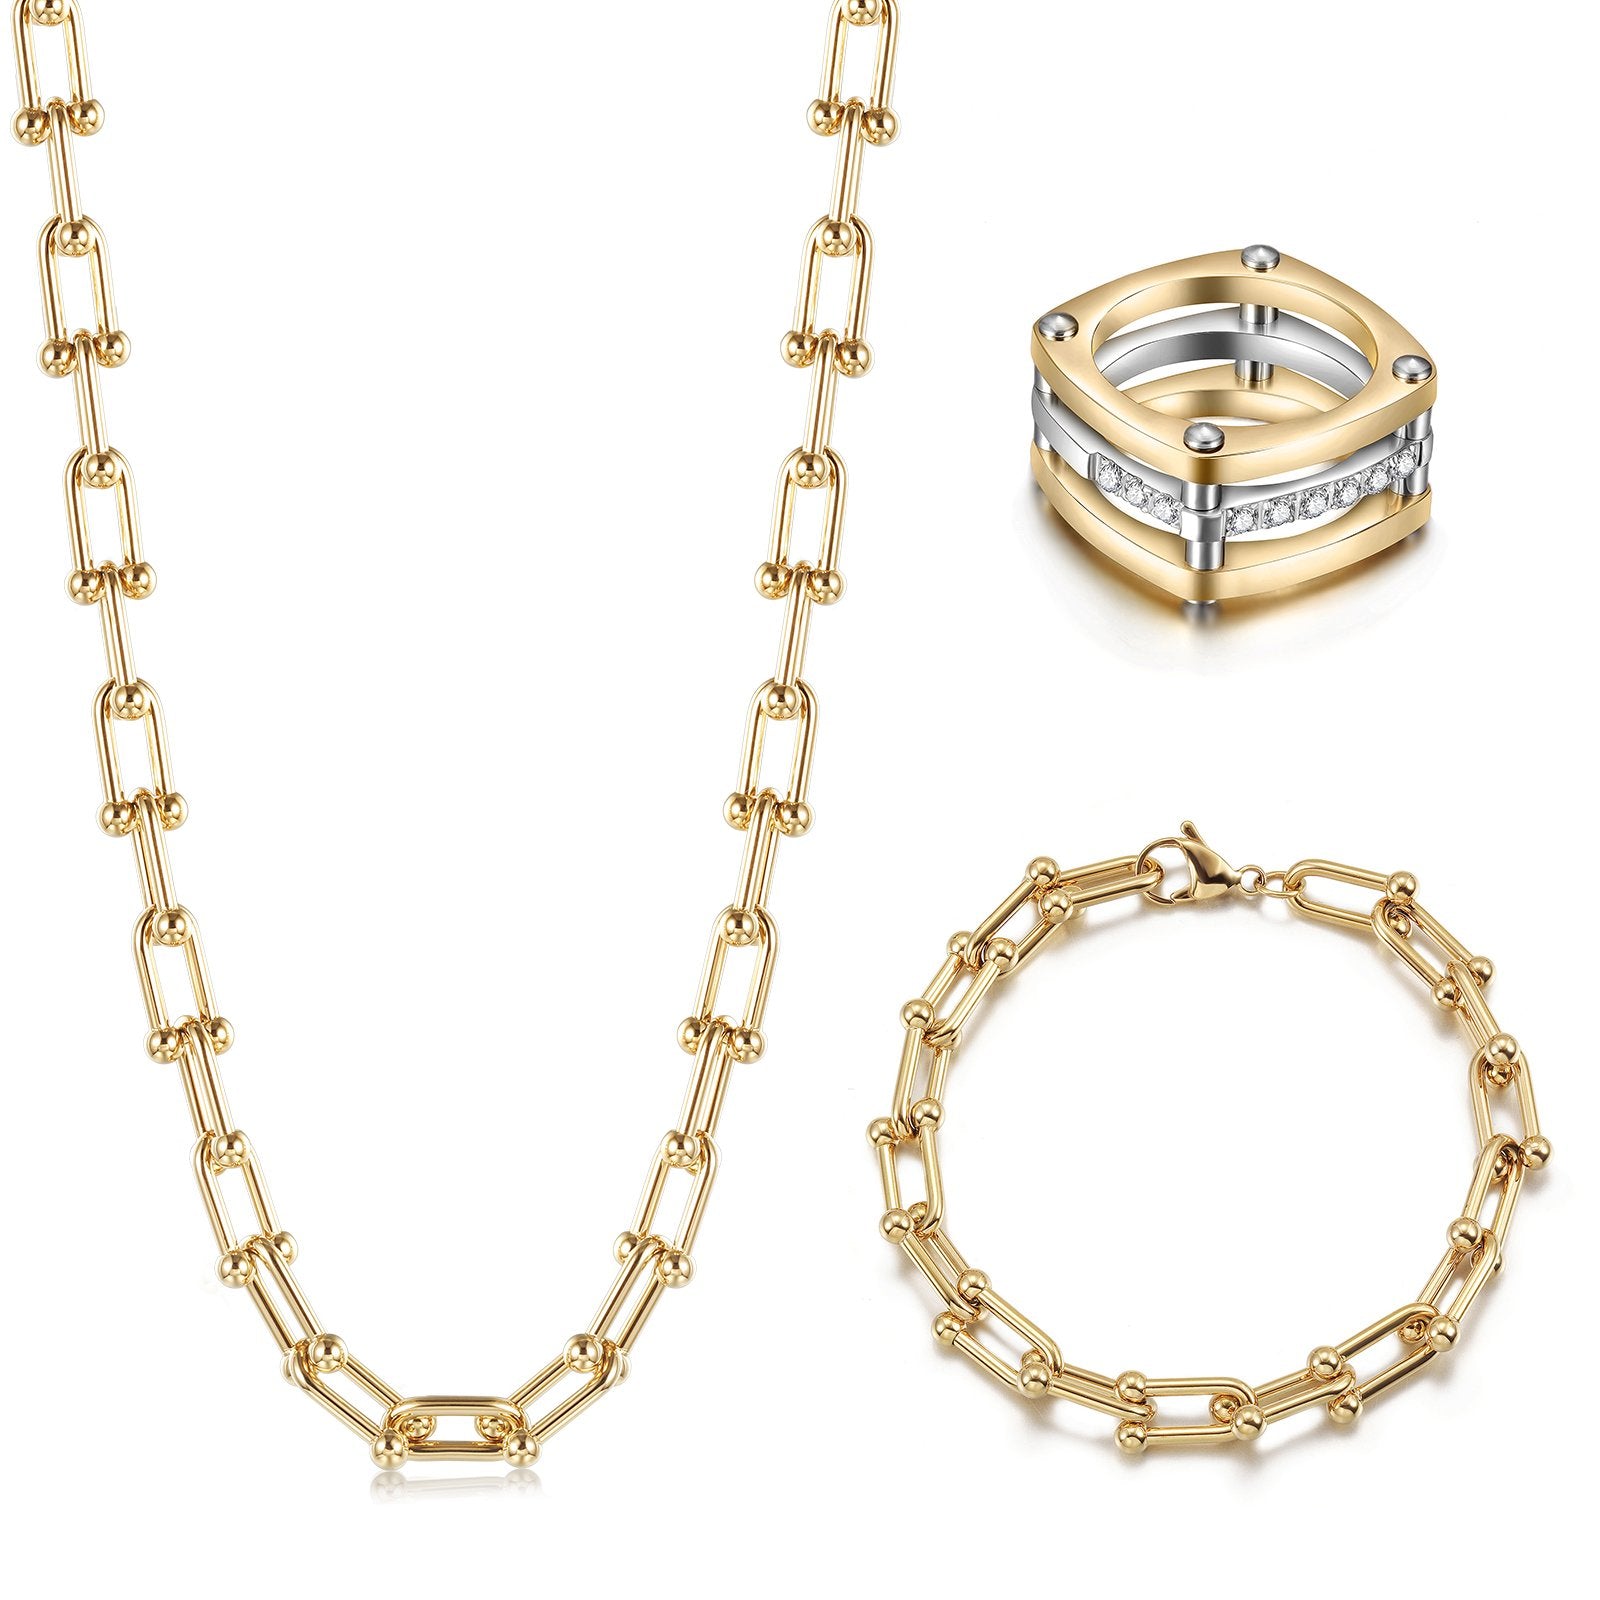 Le Cheval Chain Necklace Set - Bracelet, Ring, and Gift Box Included - Jewelry & Watches - Bijou Her -  -  - 